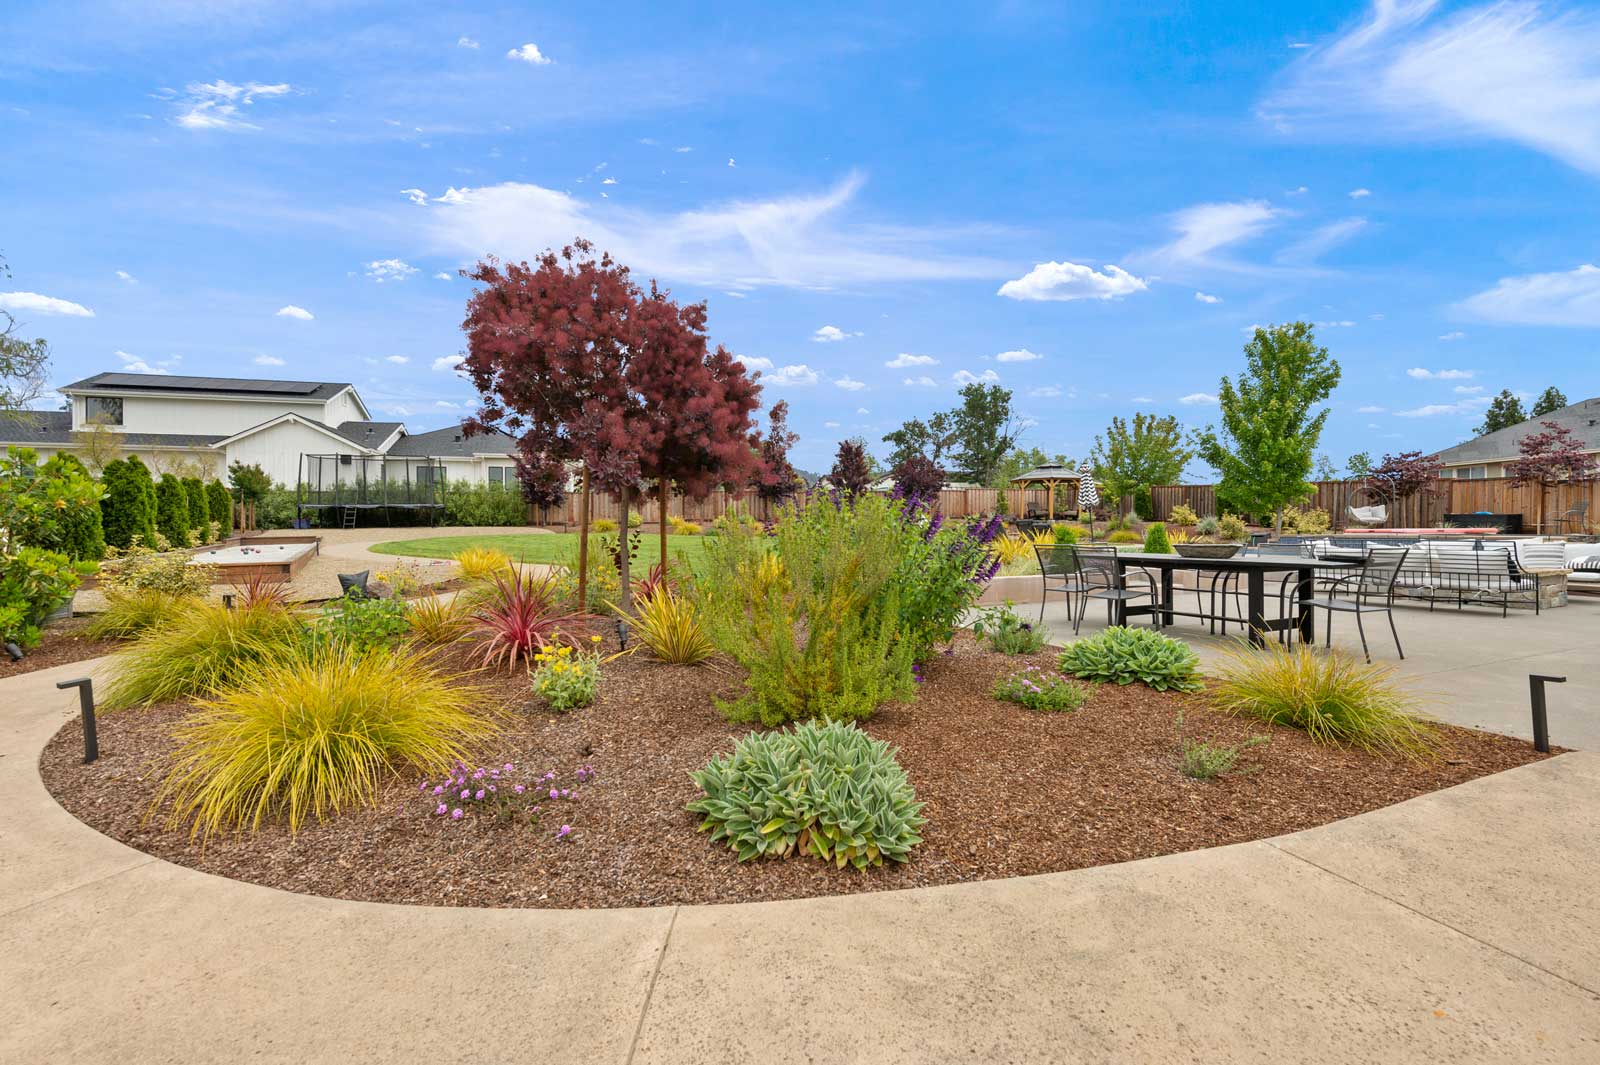 Plant Installation for your Premier Landscaping | Northview Landscaping